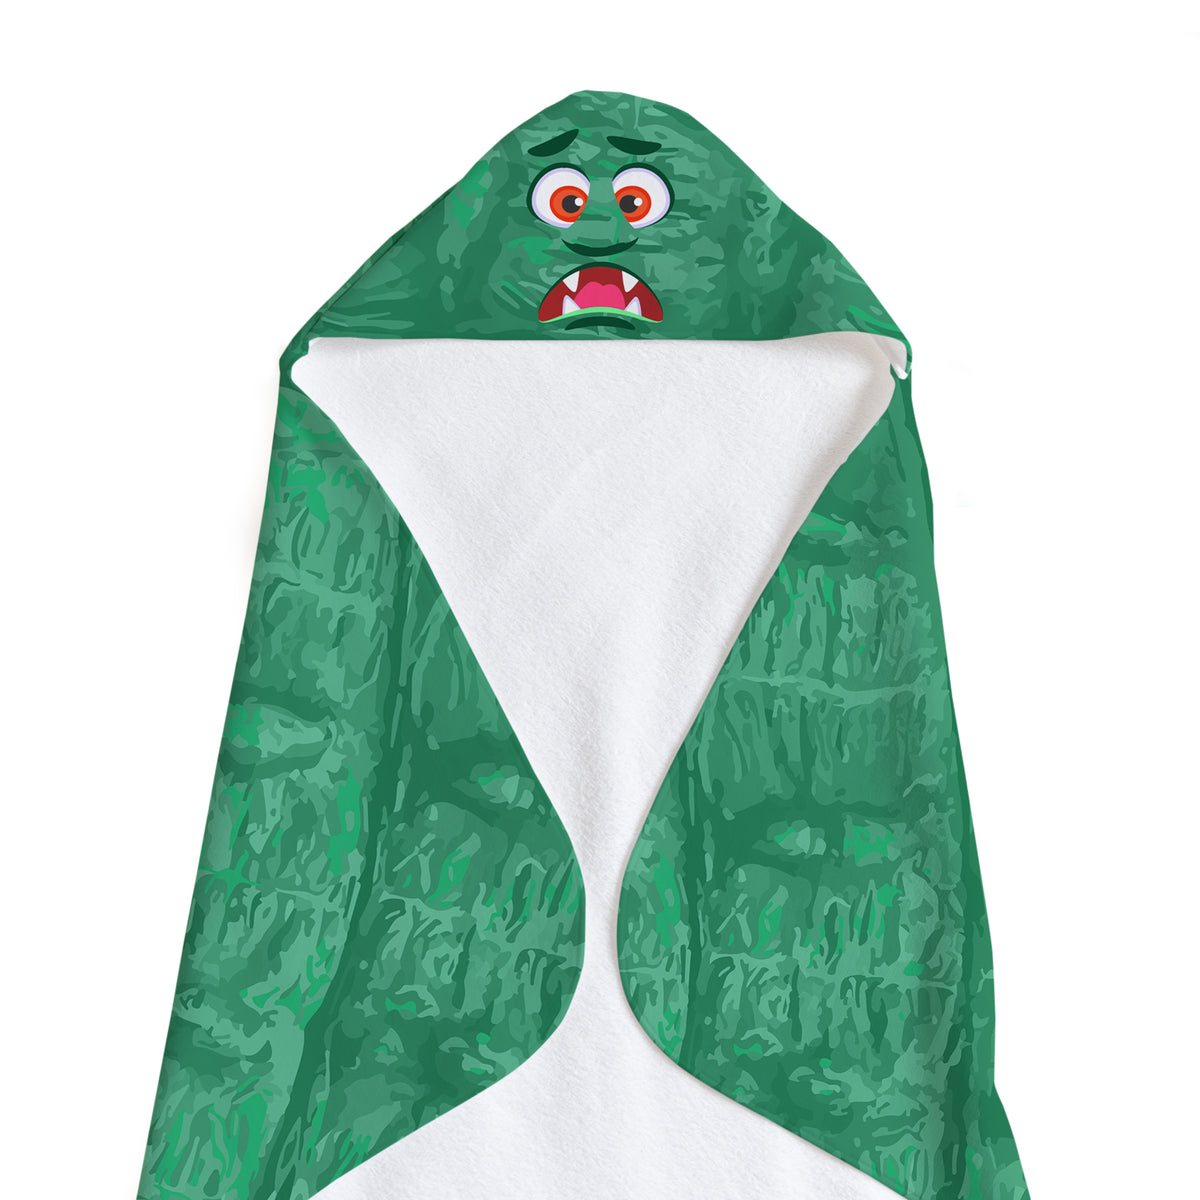 Buy this Dark Green Monster Soft and Absorbent Hooded Baby Towel